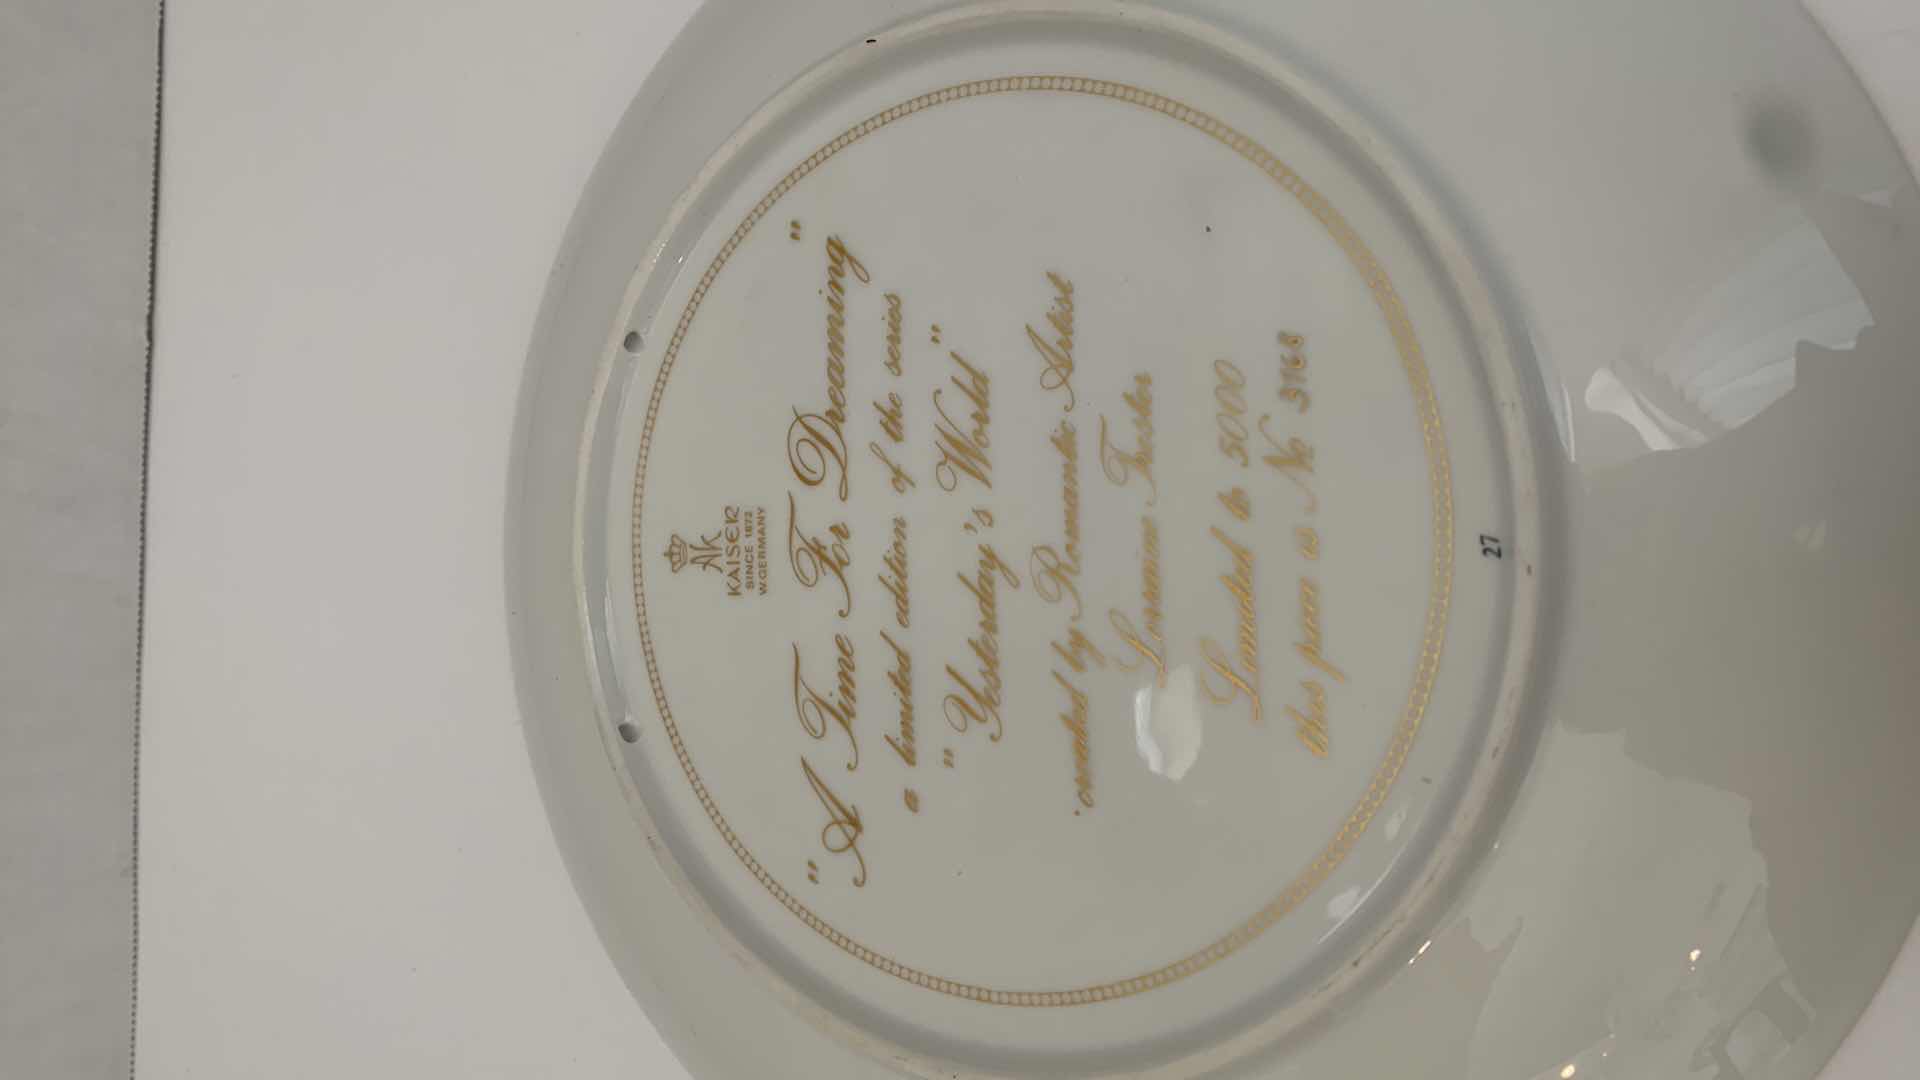 Photo 3 of LORRAINE TRESTER “A TIME FOR DREAMING” KAISER PLATE 10” WIDE